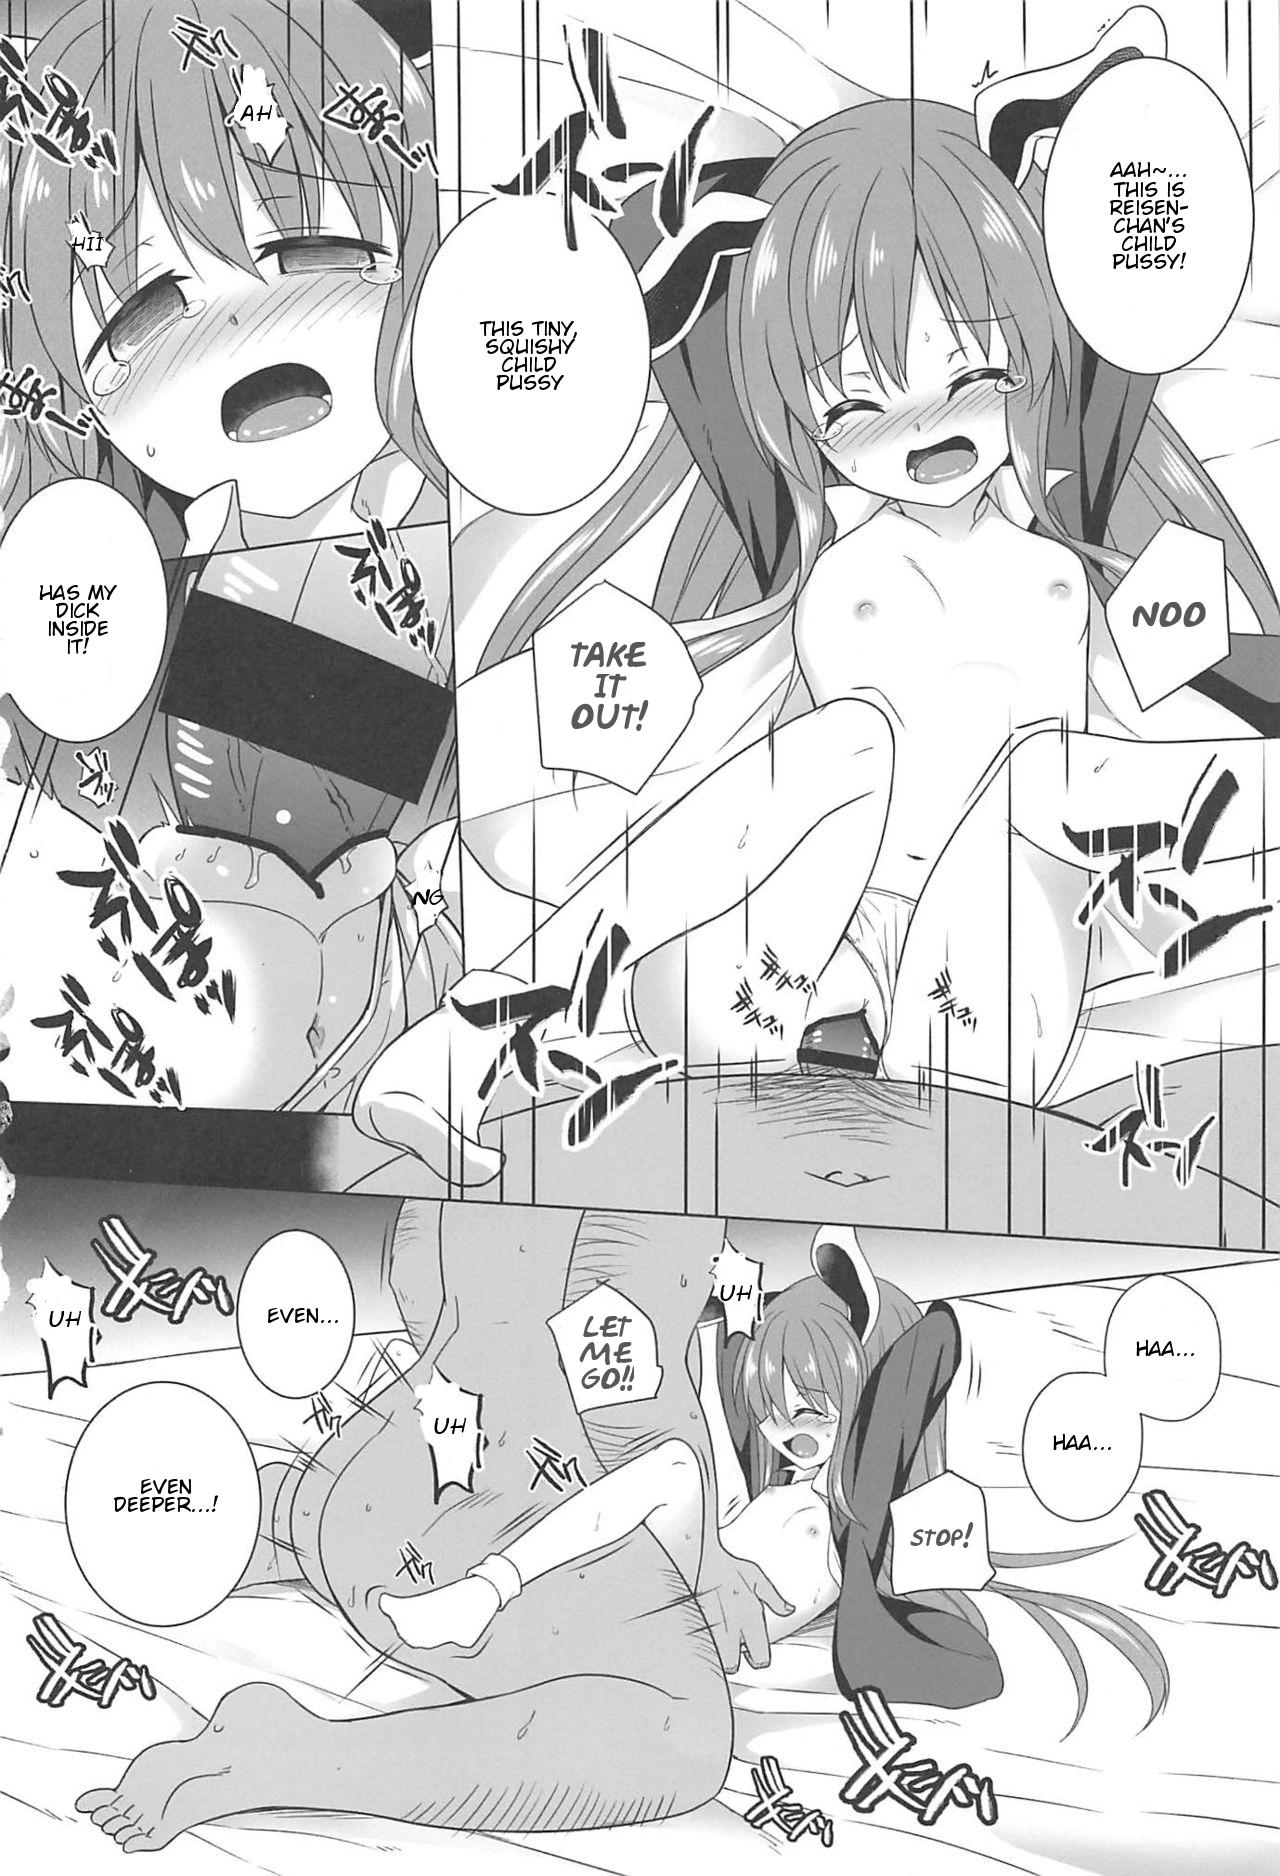 Picked Up Tsukito Haramiki Udonge Kankin Haramase | Moon Rabbit Pregnancy Records - Udonge's Conception in Captivity - Touhou project Wet Cunt - Page 9